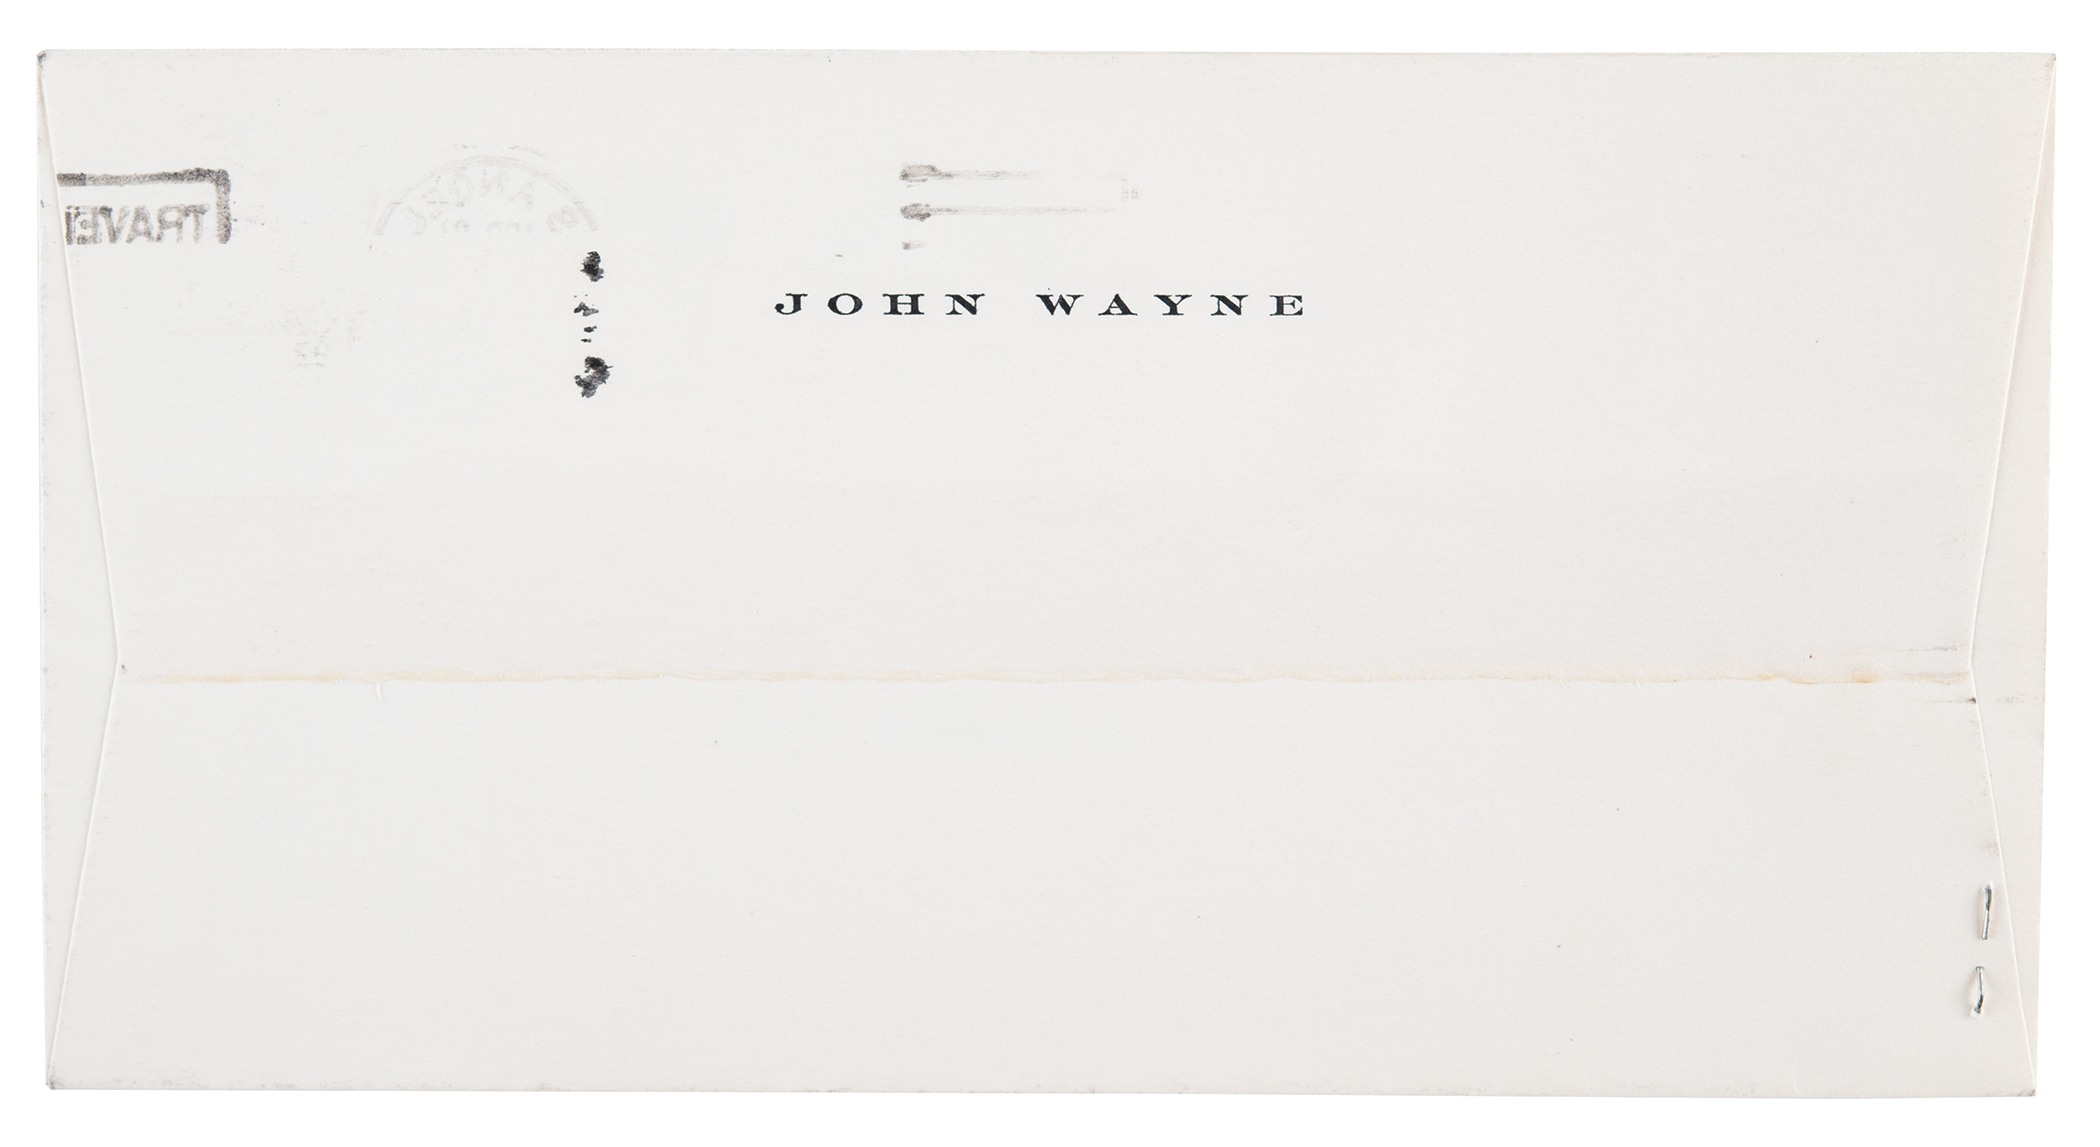 Lot #90 Ronald Reagan and John Wayne Autograph/Typed Letter Signed: "We'd like it a little more private and not so much campaign style—then we could really talk" - Image 4